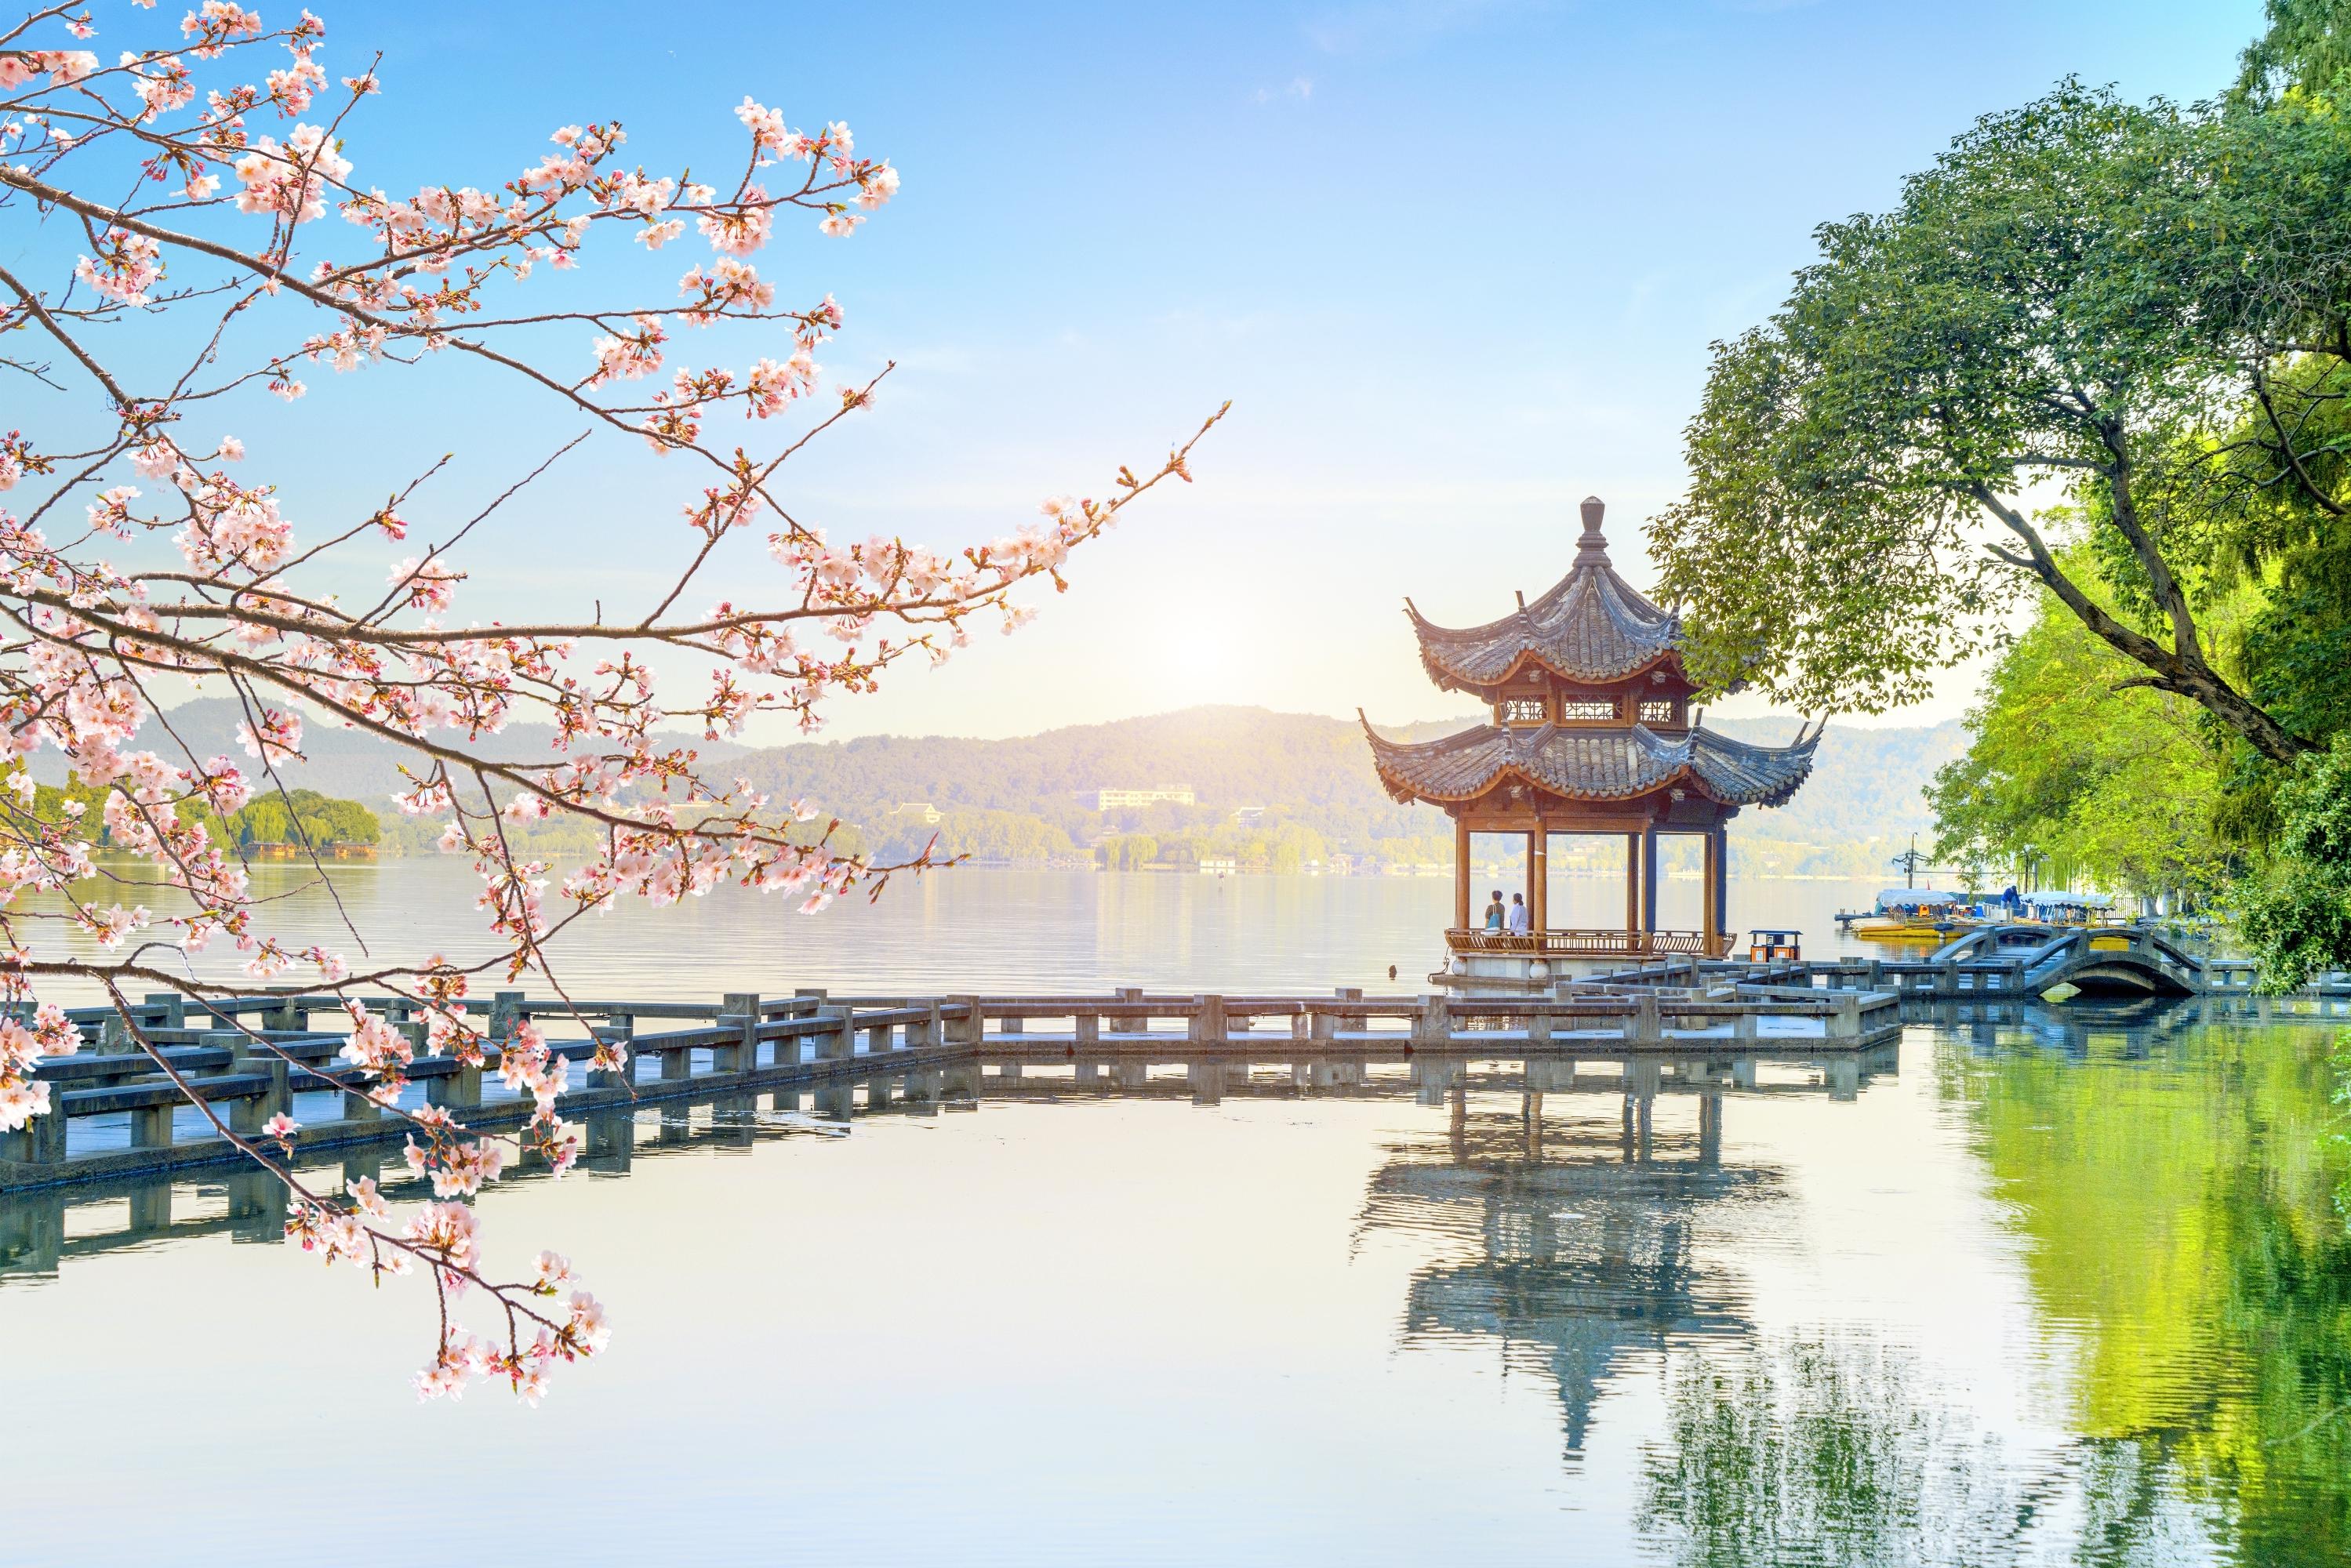 tourist attractions in zhejiang china